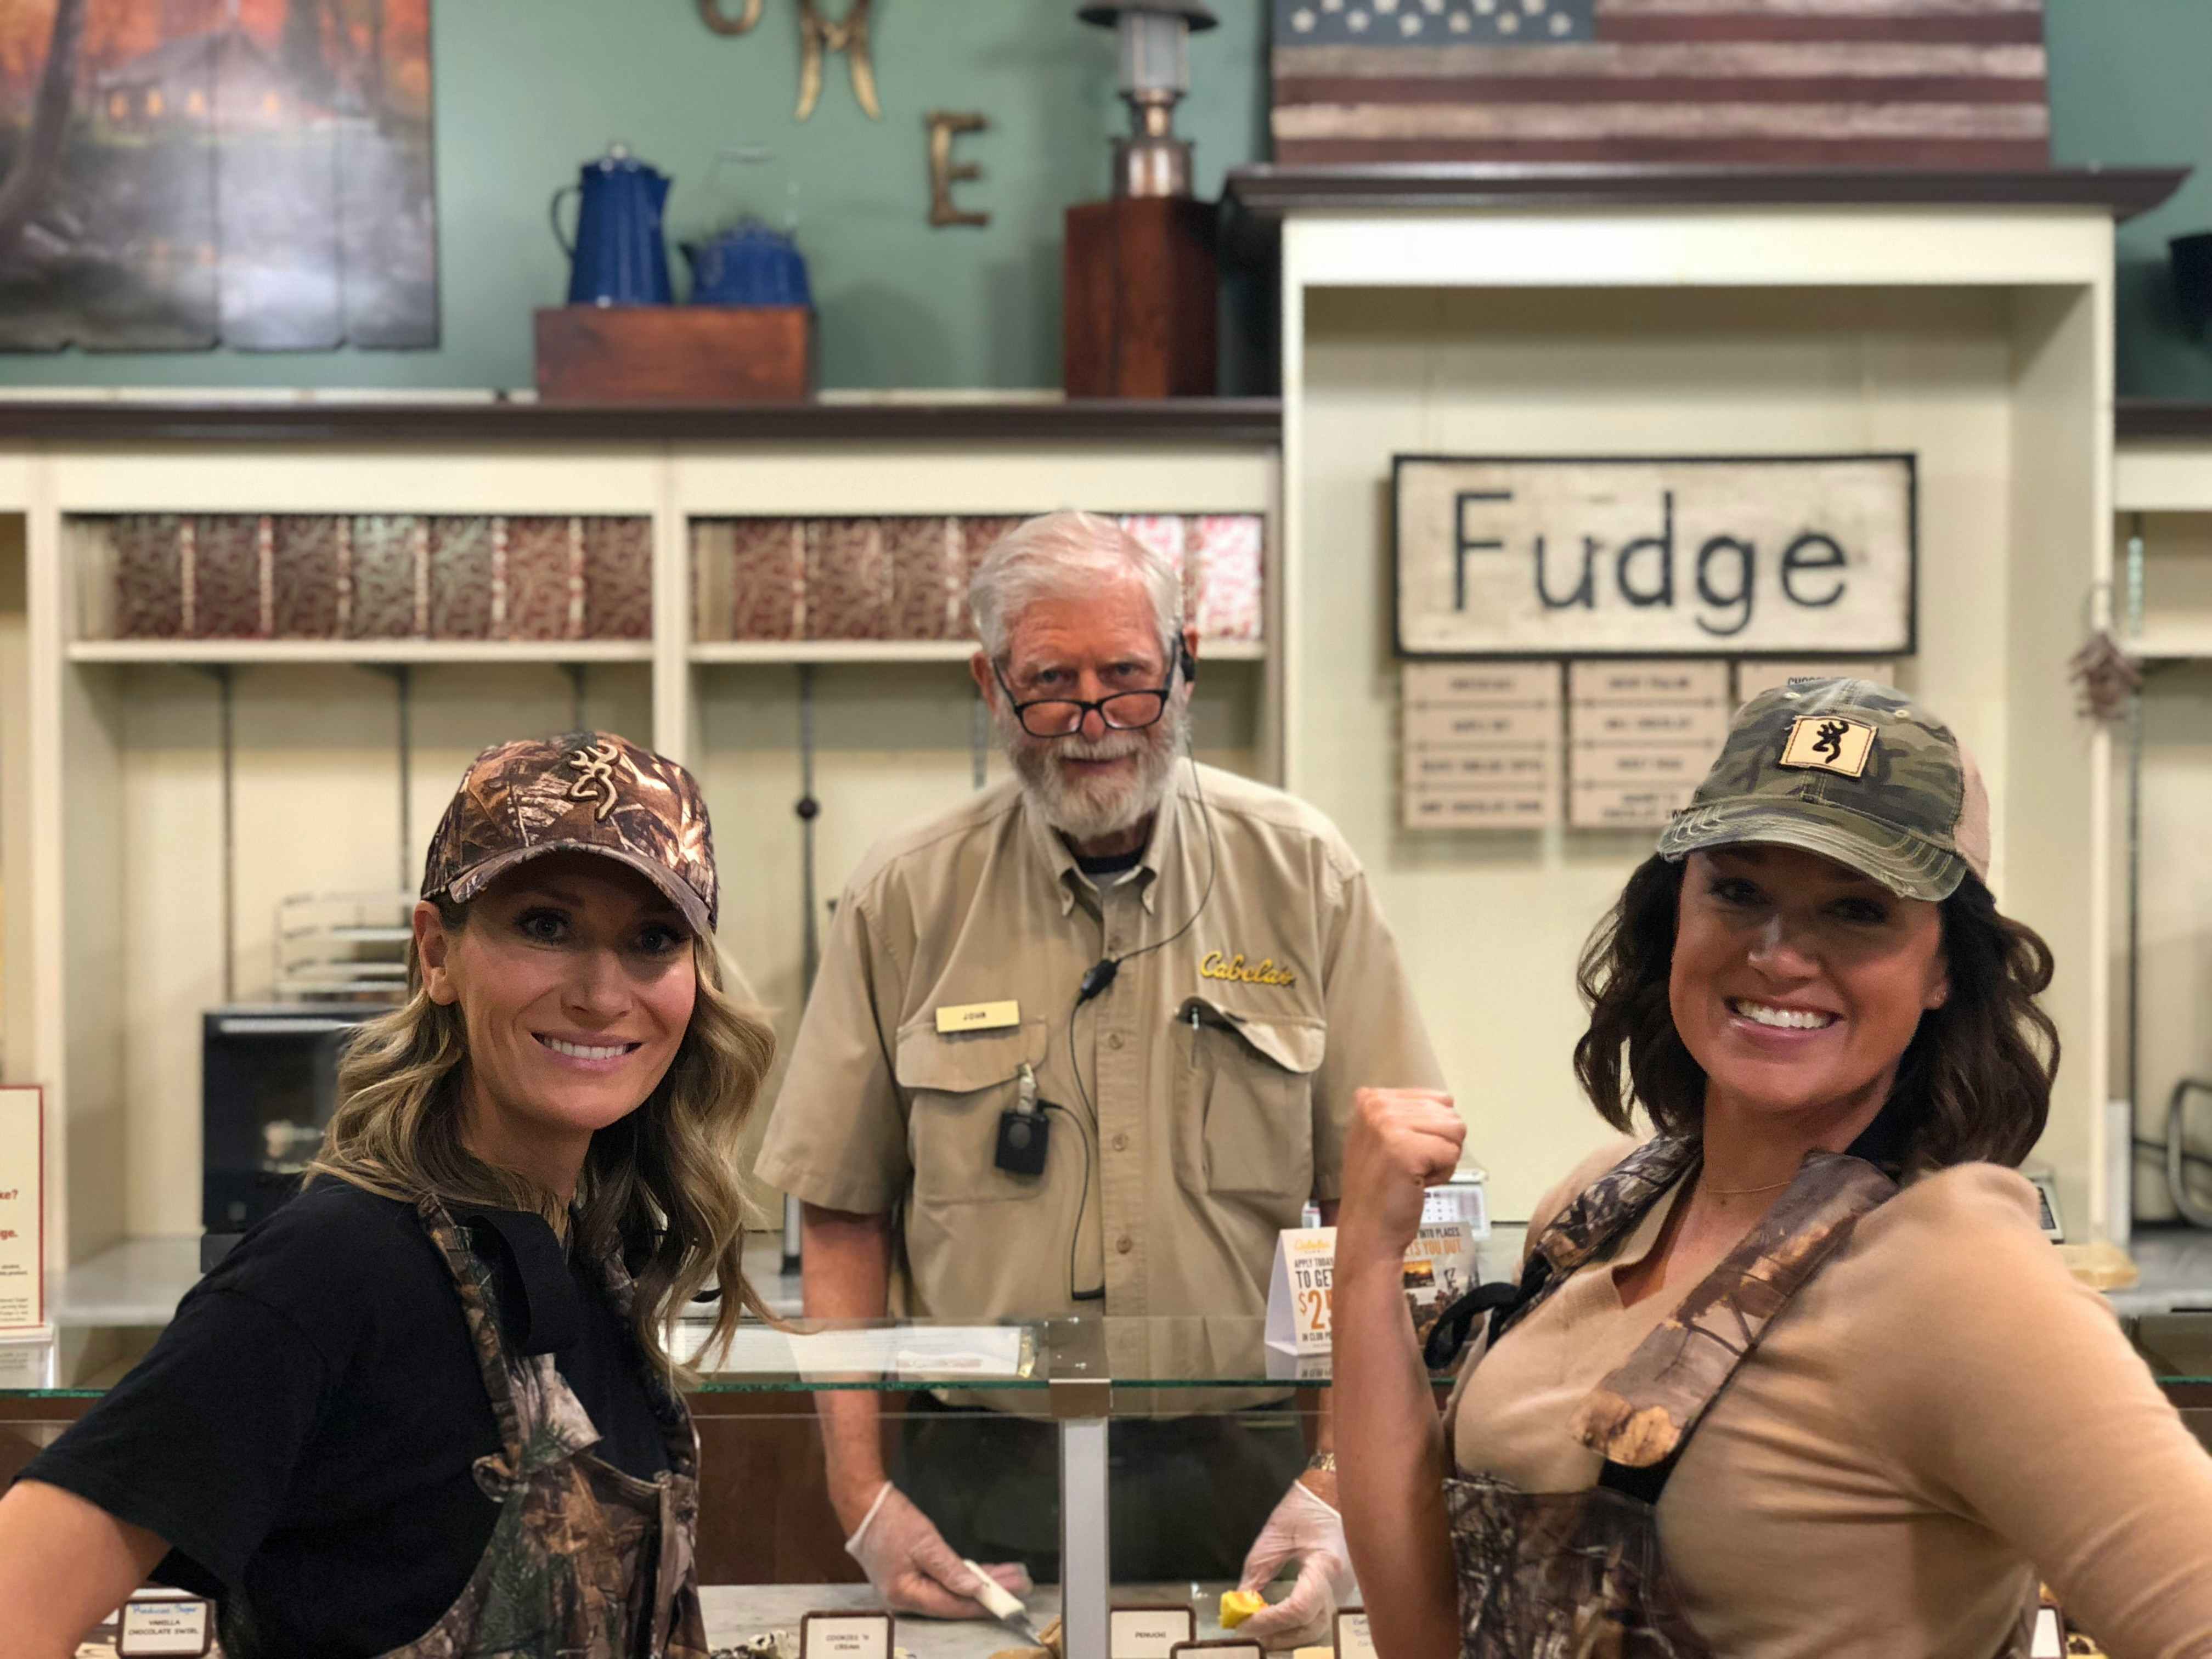 Two women posing with a Cabela's employee at the fudge bar inside Cabela's.